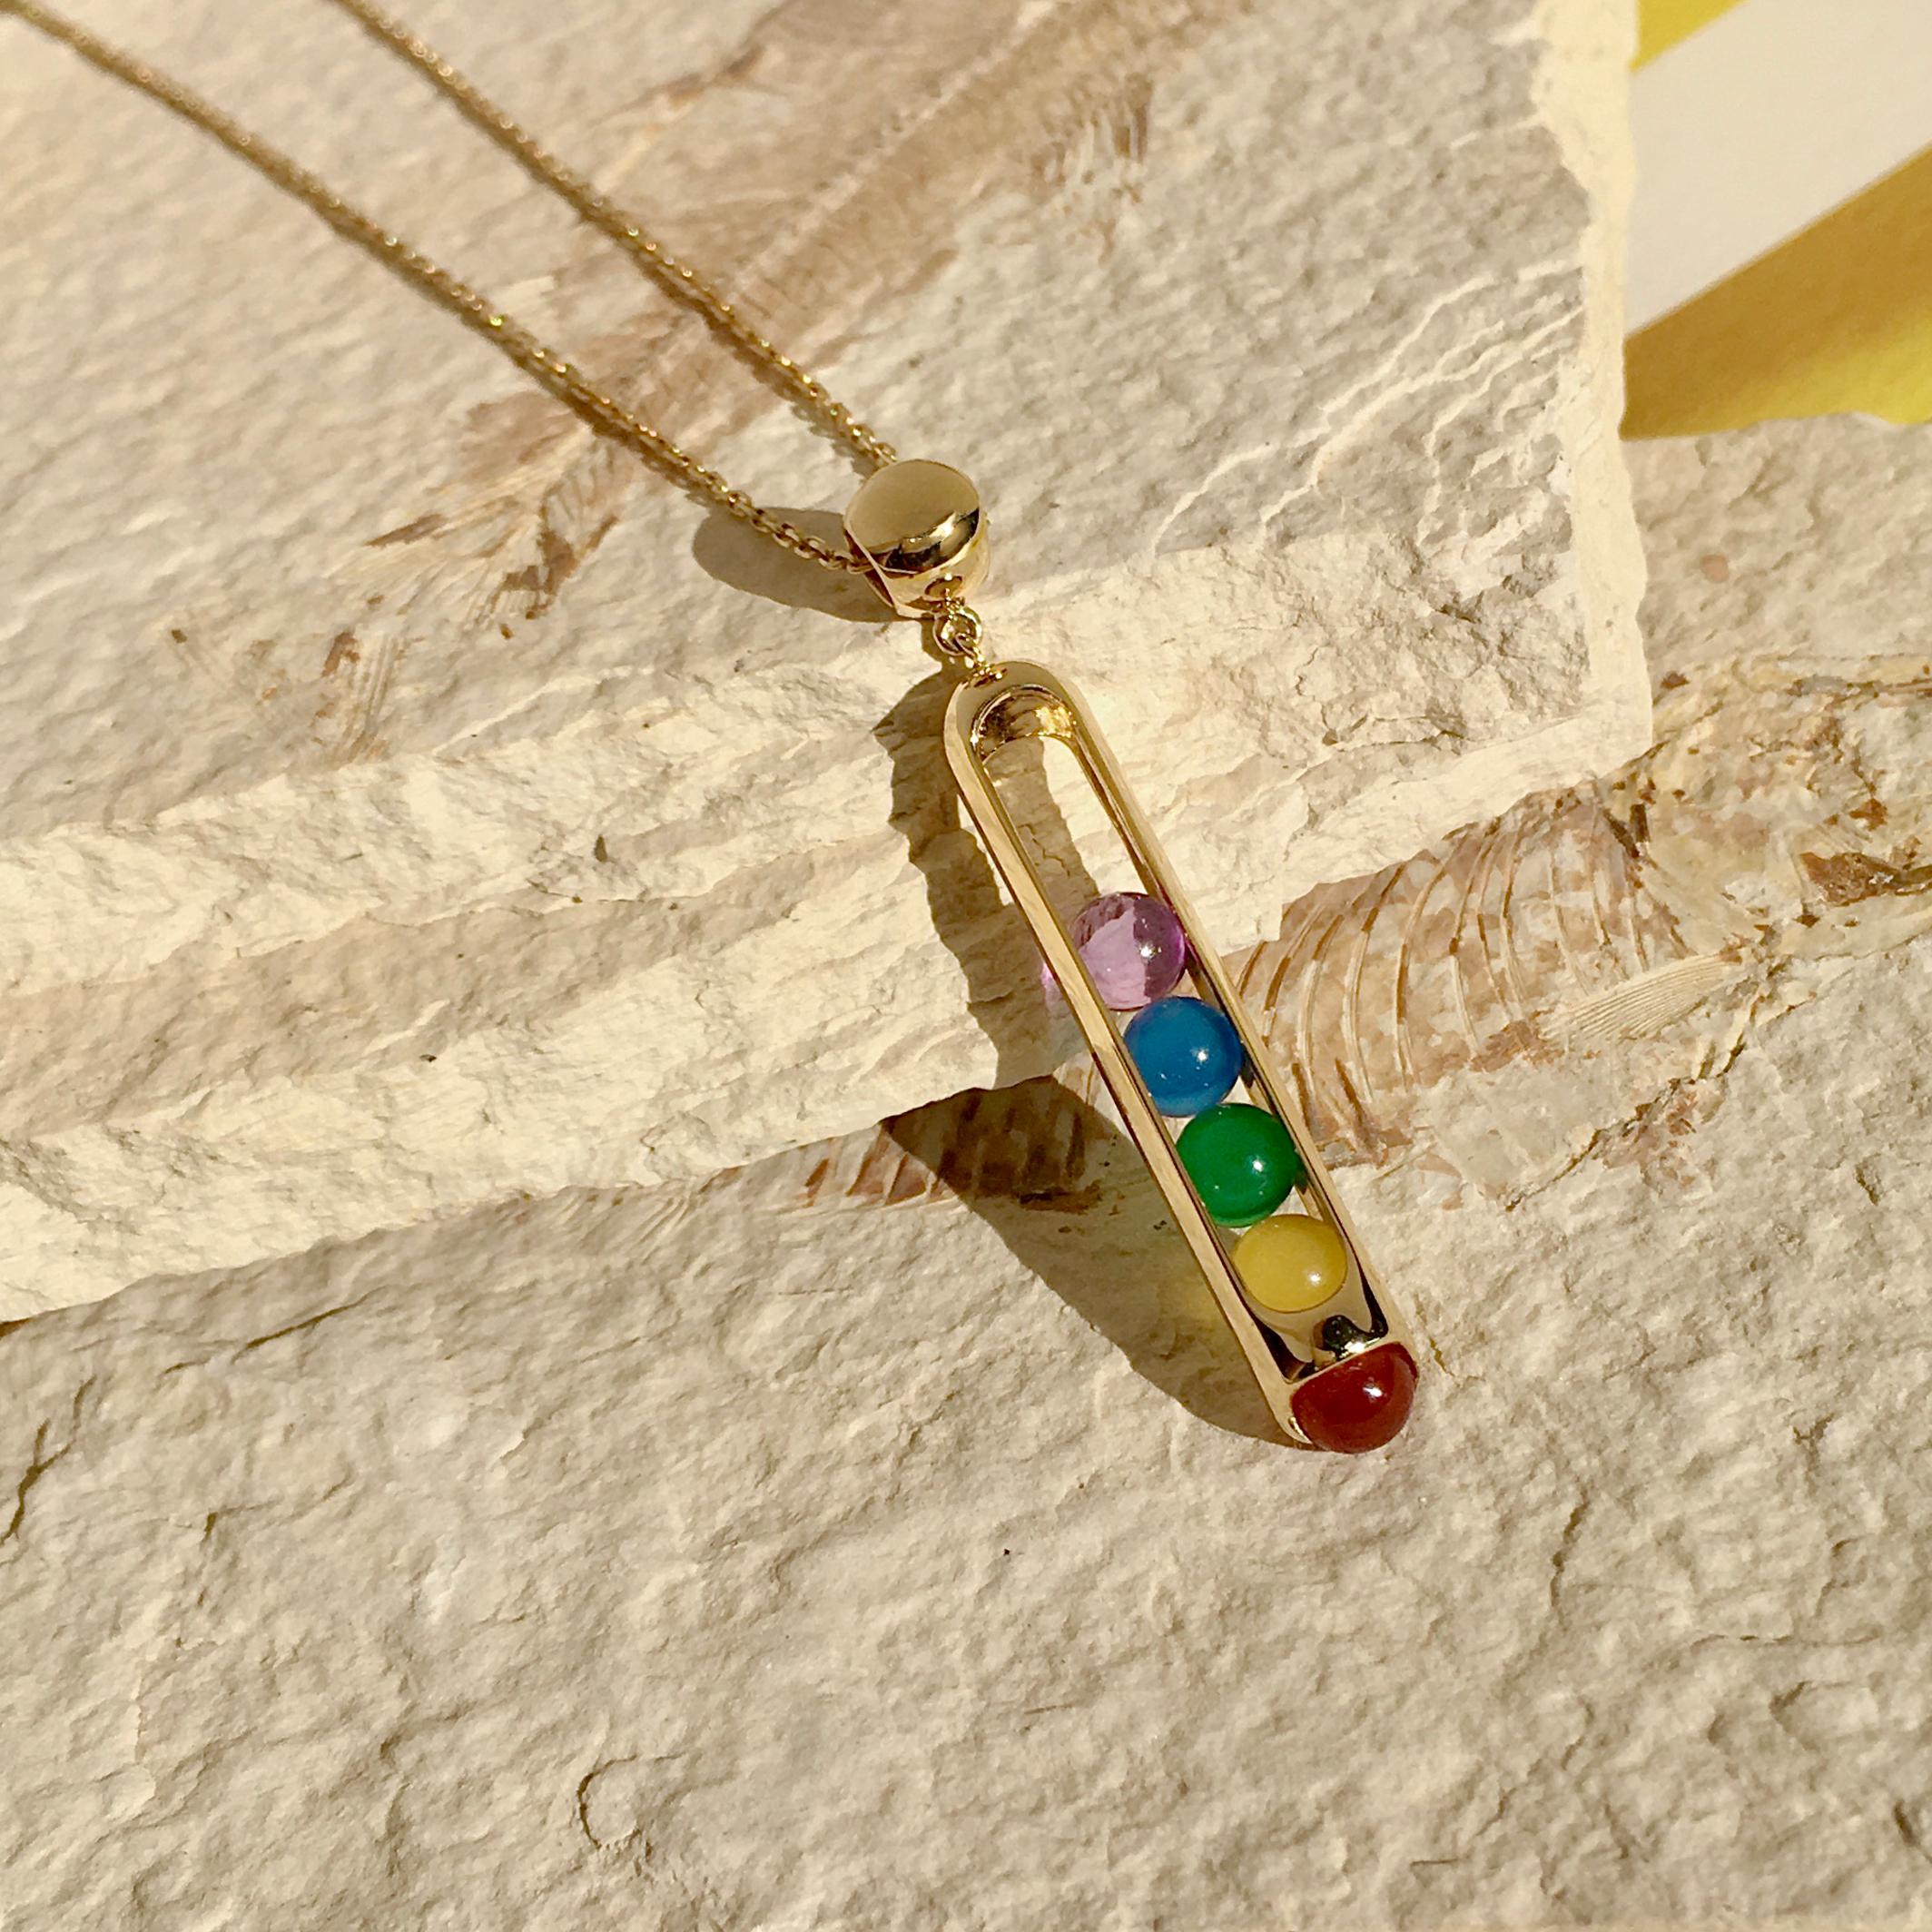 Limited Edition Melody Rainbow Pendant Necklace -a very special talisman for today. This beautifully crafted pendant necklace features a rainbow of playable carnelian, yellow, blue, green chalcedony and amethyst beads set in 18 karat yellow gold on